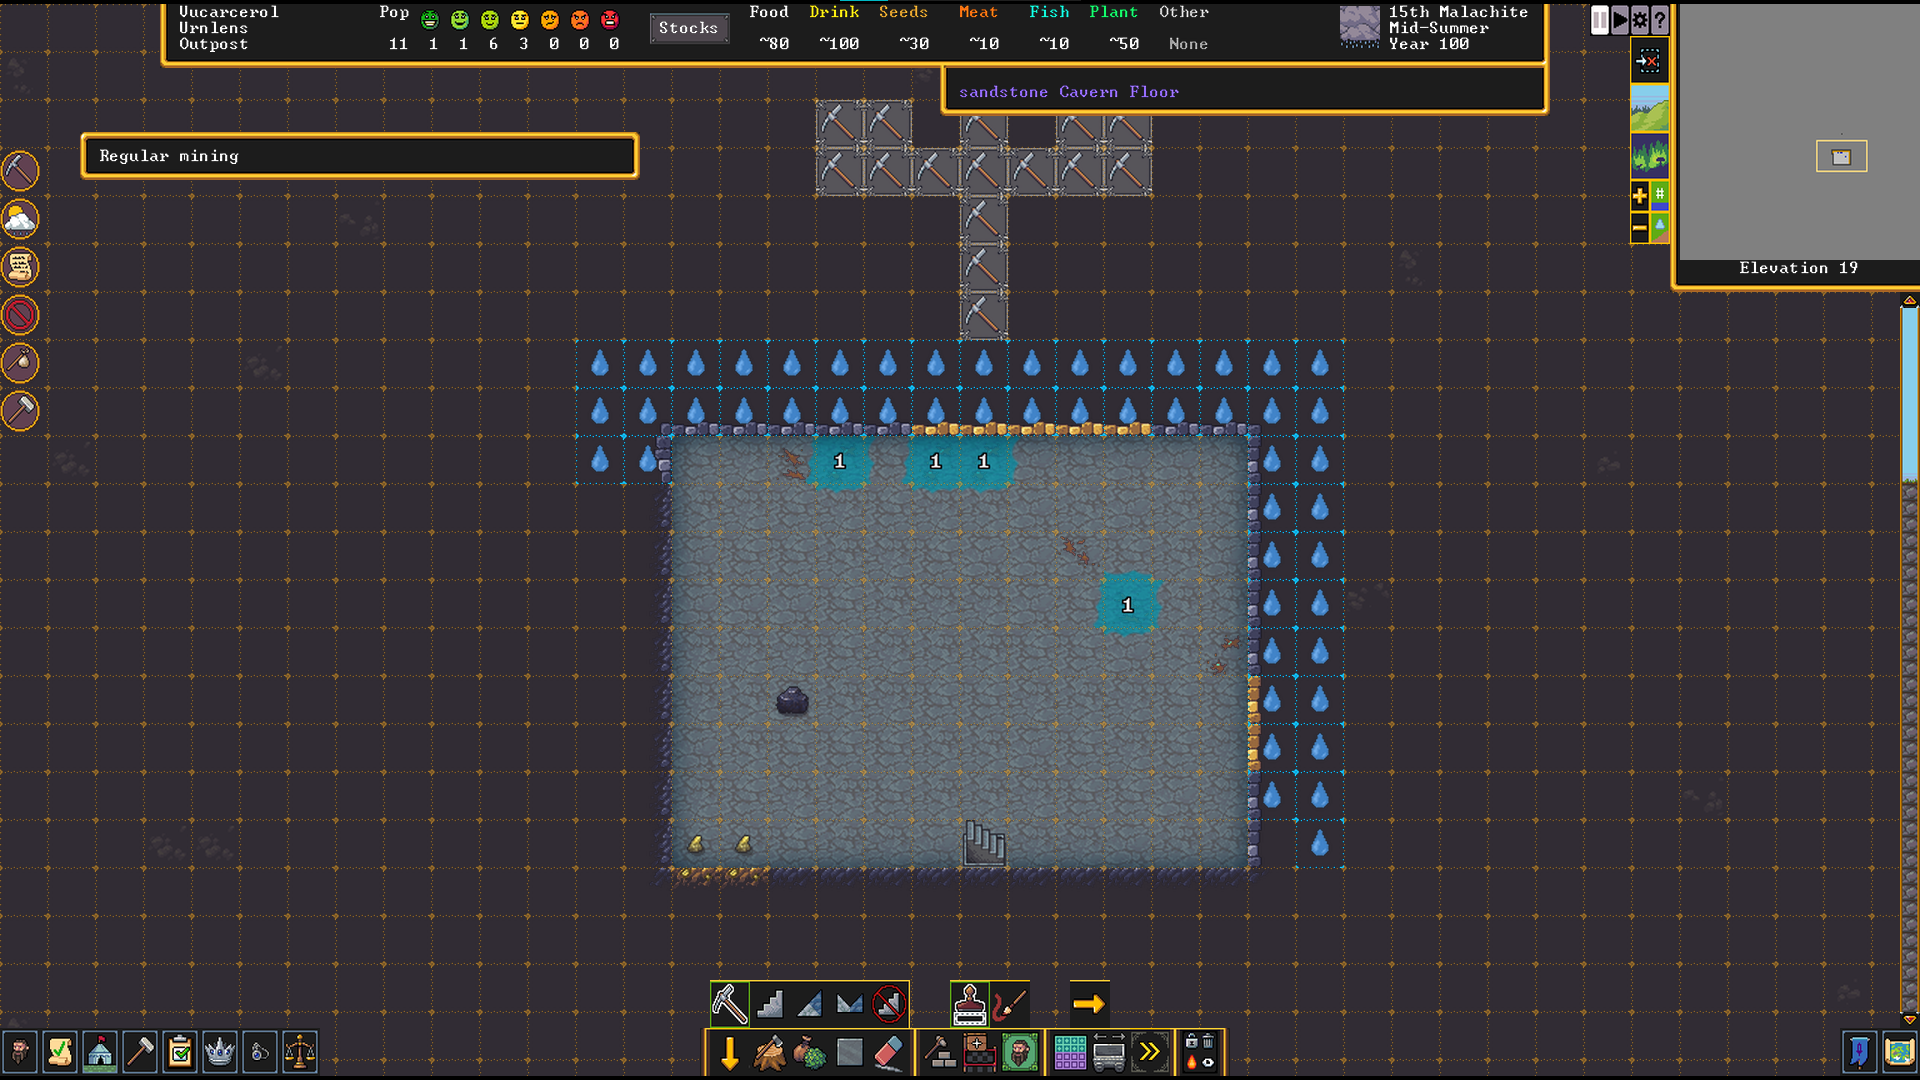 How to Deal with Aquifers in Dwarf Fortress